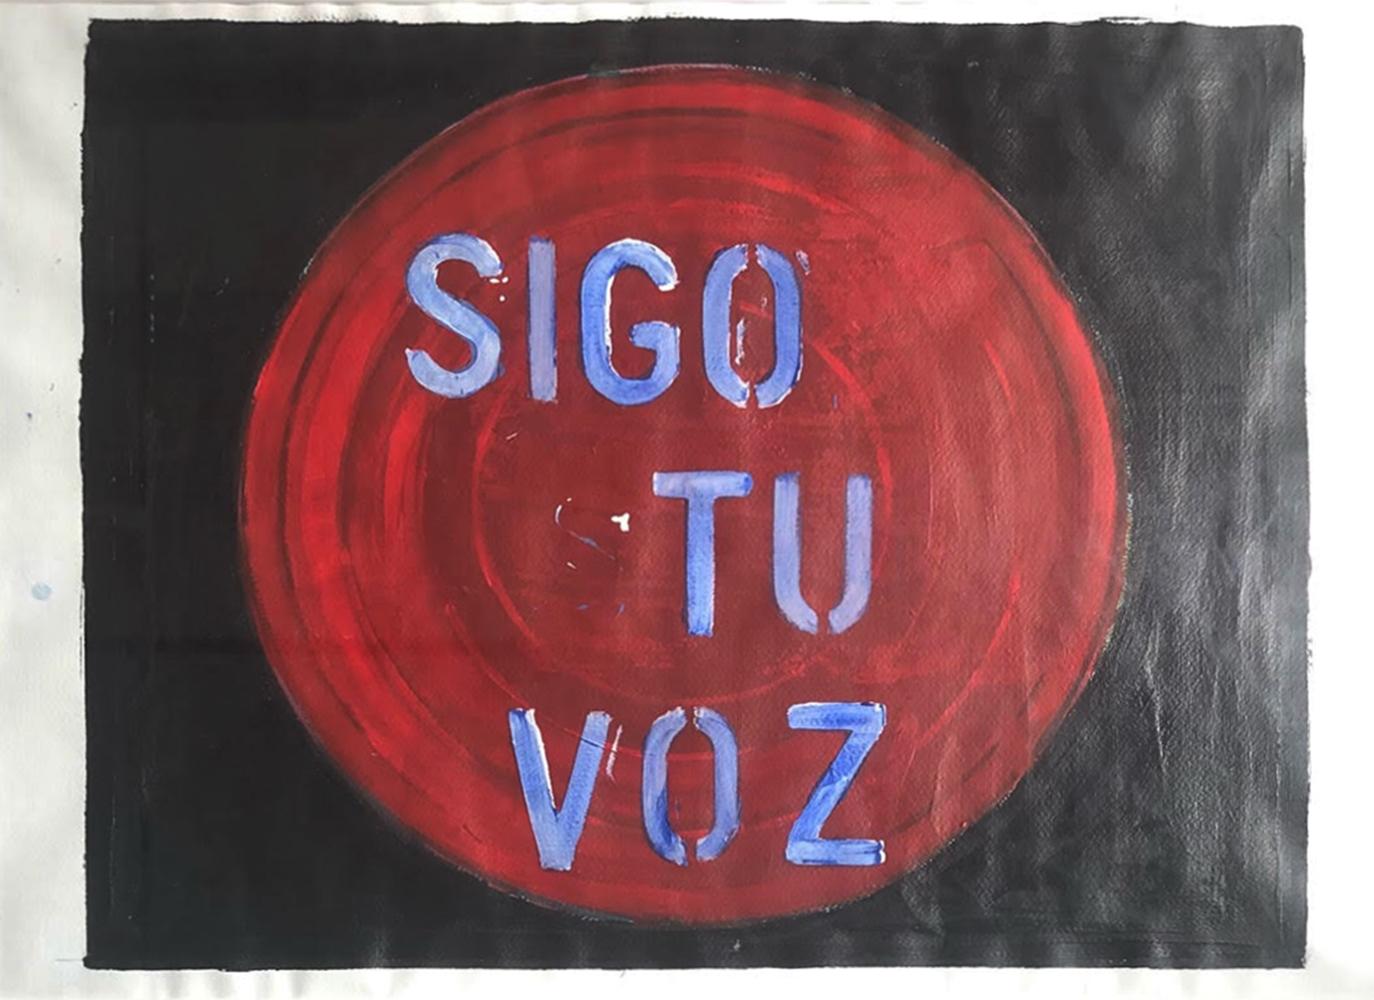 Sergio Bazan - Blue Note, Sigo tu voz and Solo (Triptych), From the Chaleco  Quimico series For Sale at 1stDibs